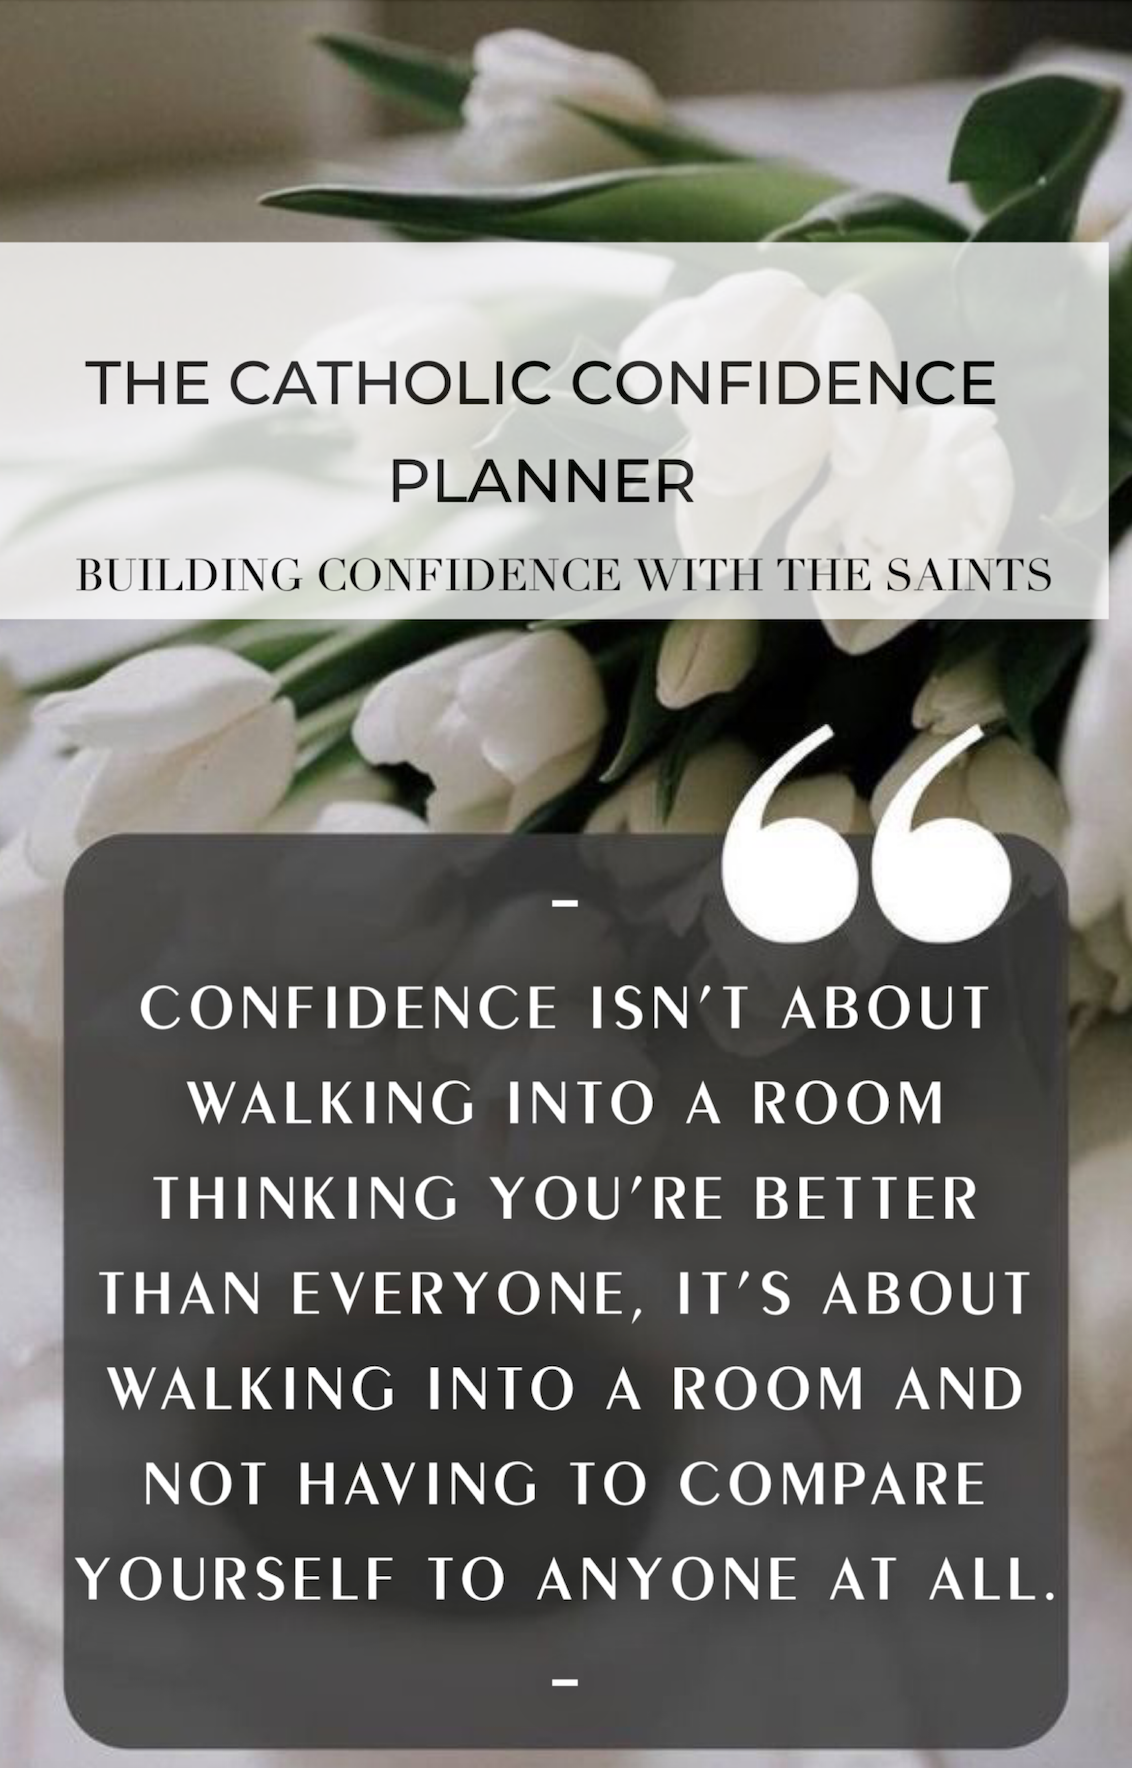 The Catholic Confidence Planner: Building Confidence with the Saints